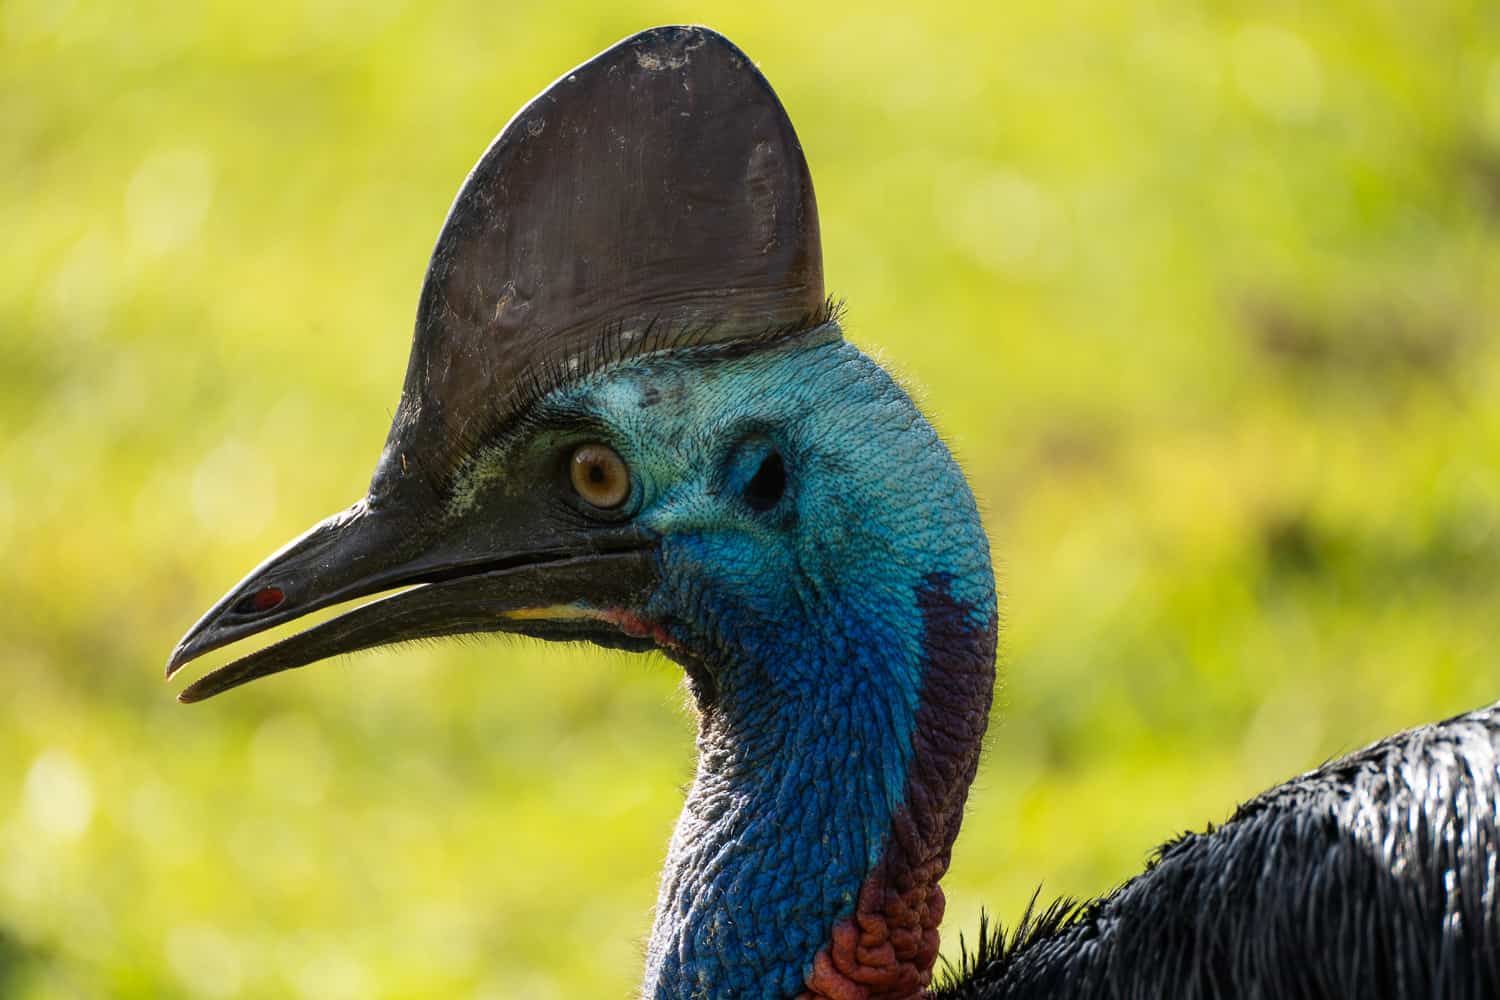 Close up of the distinctive blue markings on a Cassowary's head, Mission Beach, North Queensland, Australia